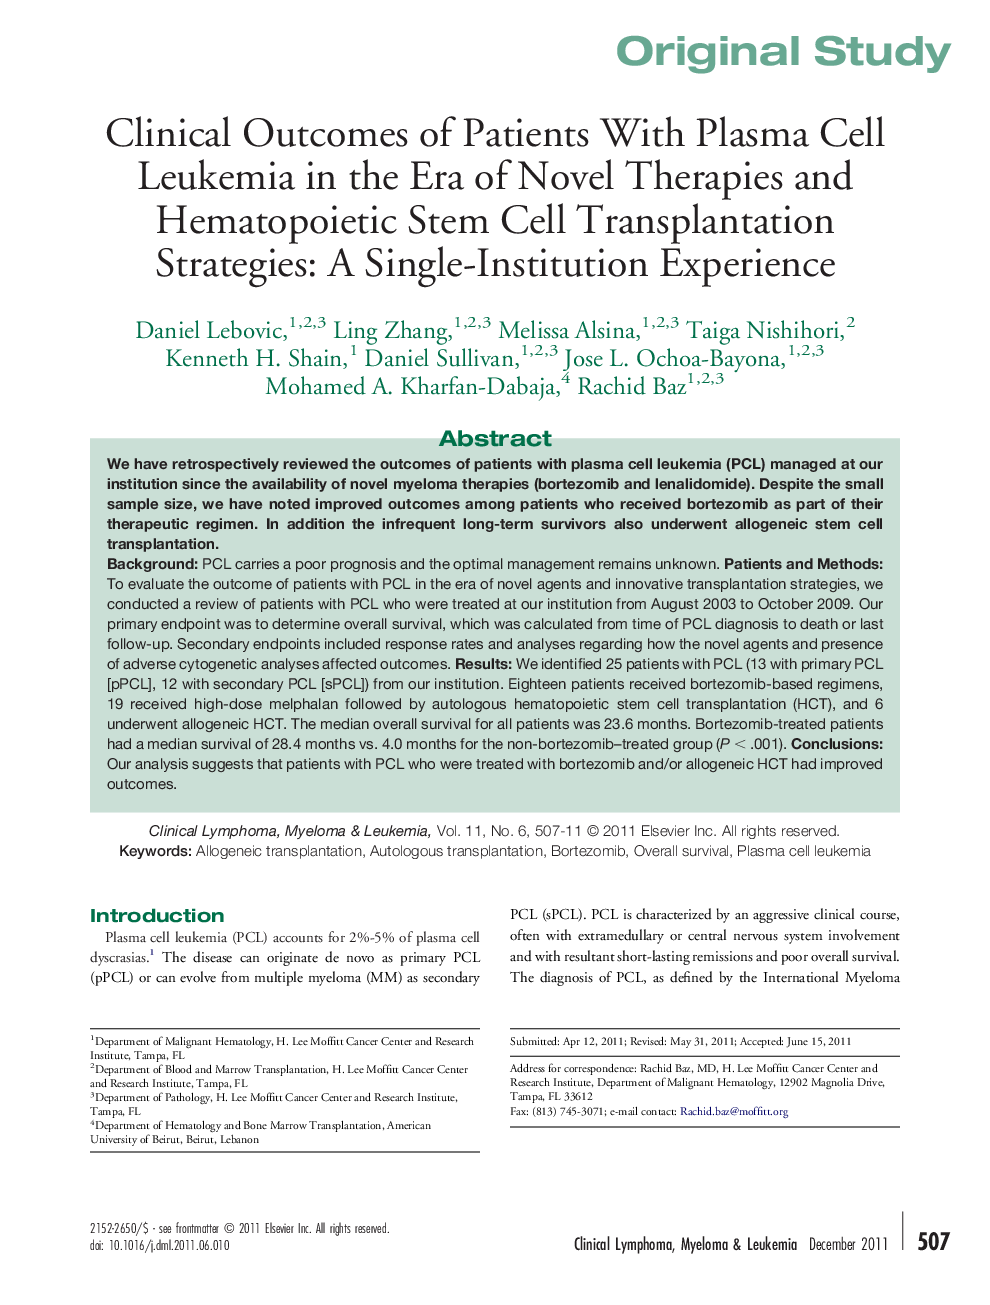 Clinical Outcomes of Patients With Plasma Cell Leukemia in the Era of Novel Therapies and Hematopoietic Stem Cell Transplantation Strategies: A Single-Institution Experience